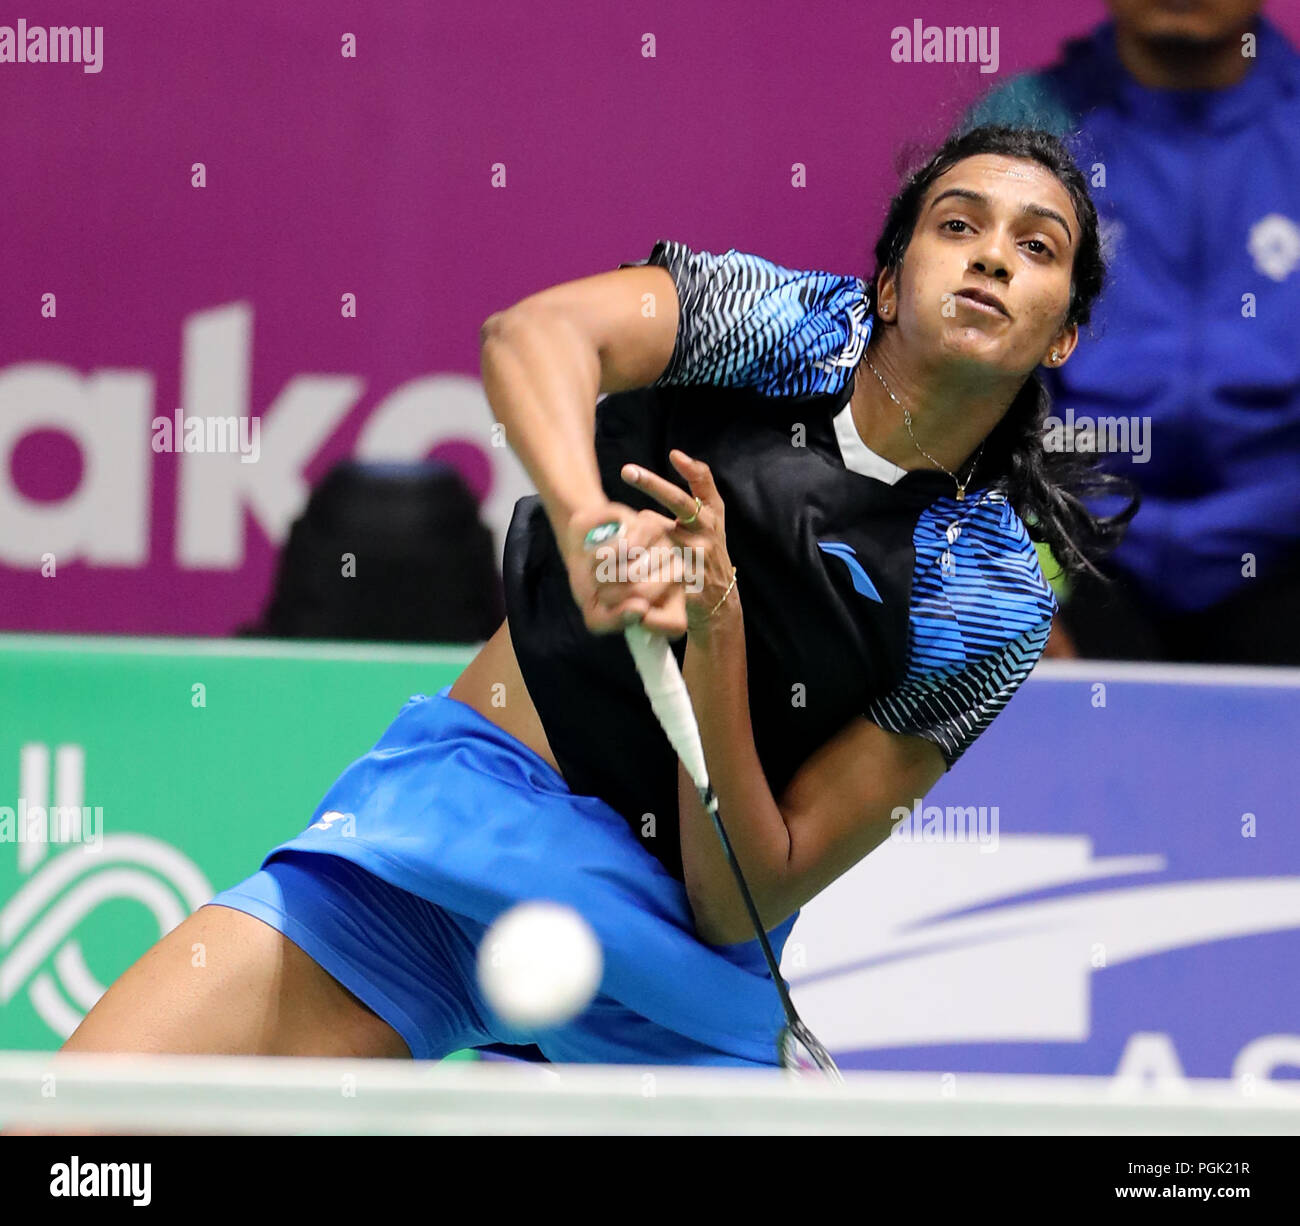 Jakarta, Indonesia, 27th Aug 2018 Badminton Semifinals Indias PV Sindhu defeated World No.2 Akane Yagamuchi of Japan 21-17, 15-21, 21-10 to enter the final of the womens singles event in Jakarta